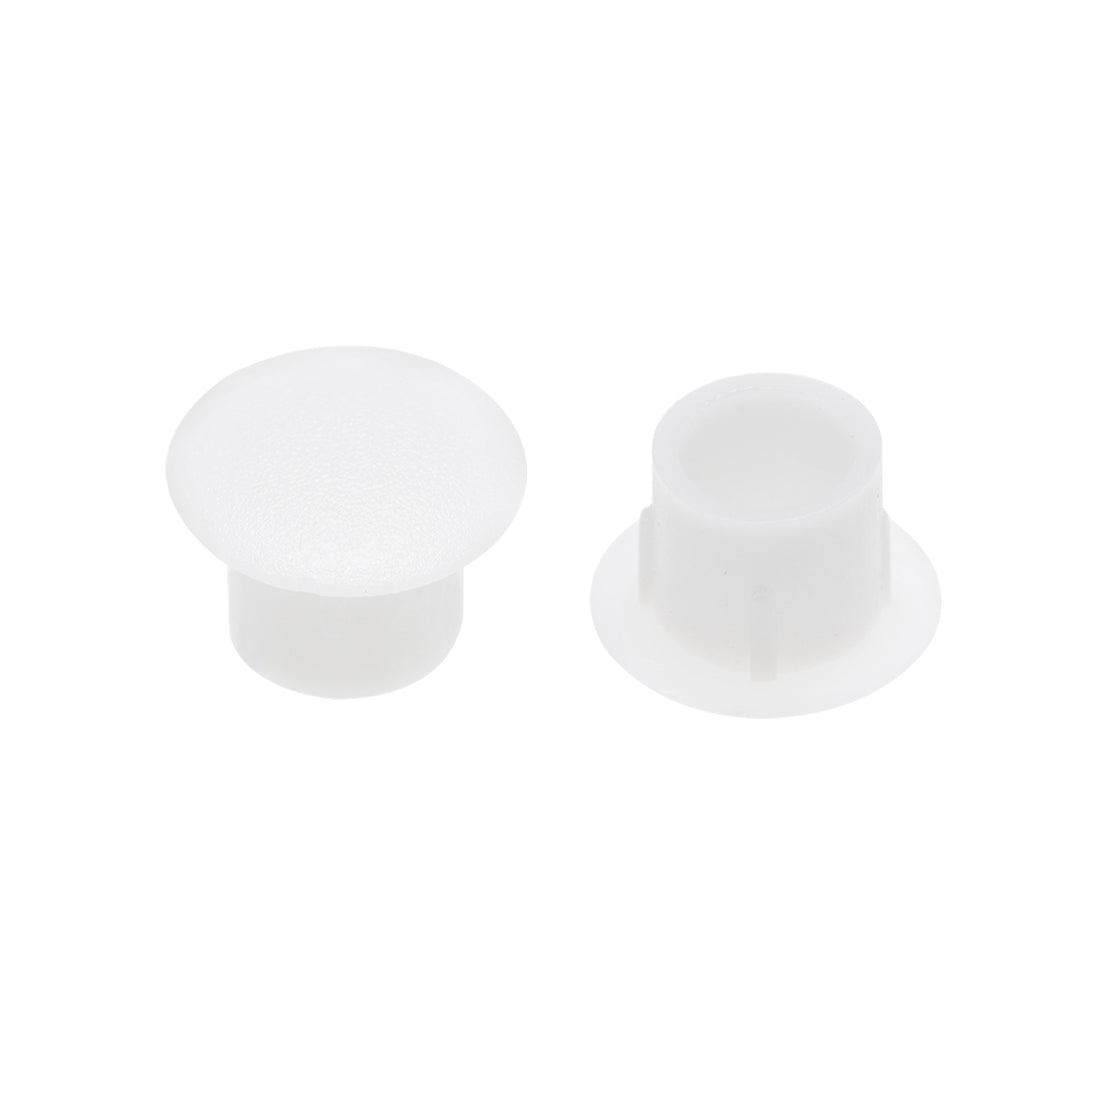 uxcell Uxcell Screw Cap Cover,50Pcs 8mm Dia White Plastic Locking Hole Plug Button Top Flush Type for Cabinet Cupboard Shelf